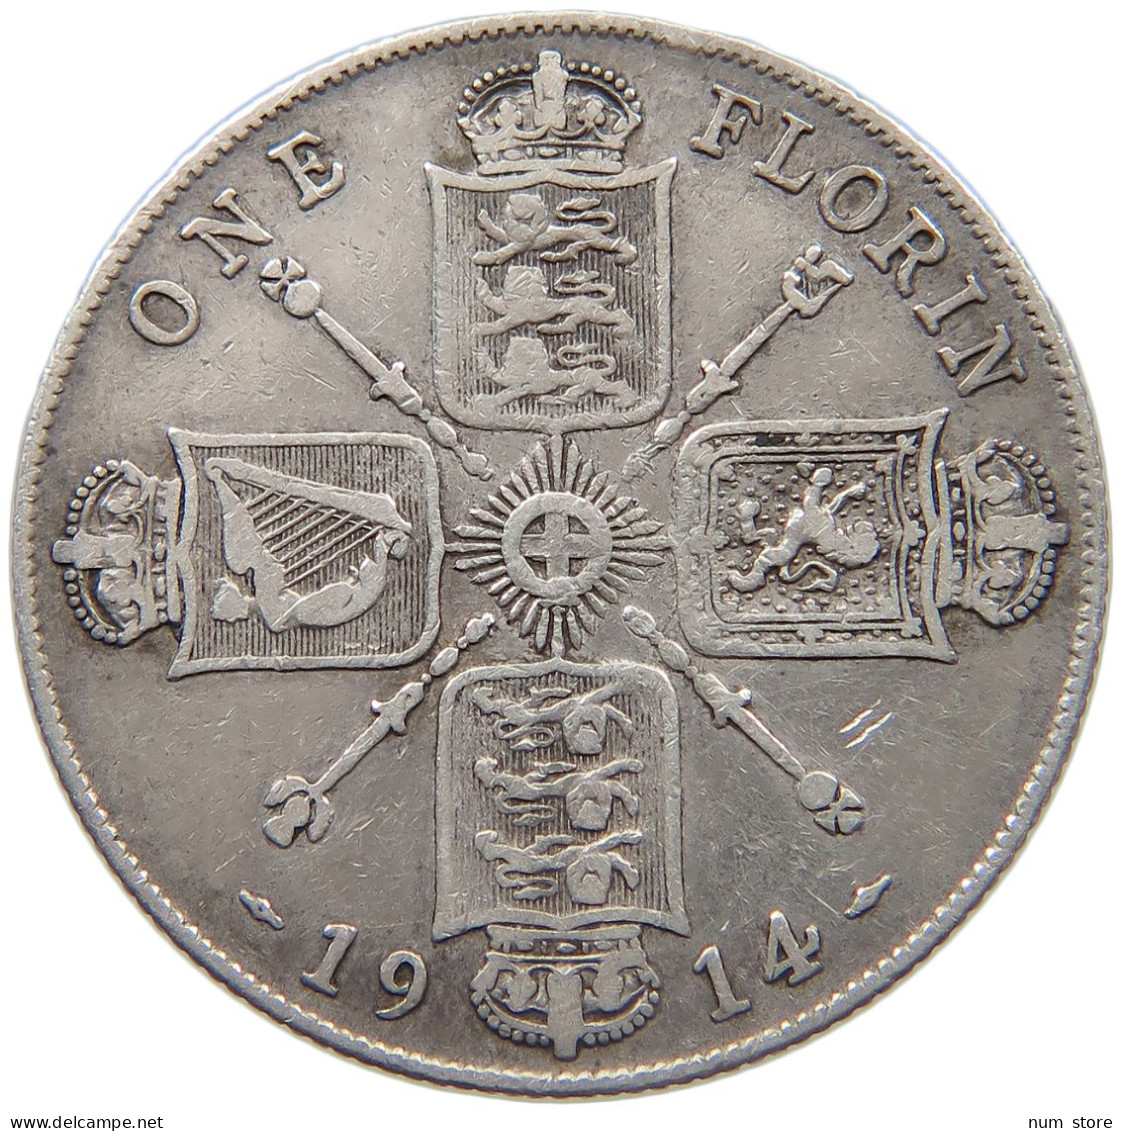 GREAT BRITAIN FLORIN 1914 GEORGE V. (1910-1936) #MA 023348 - J. 1 Florin / 2 Schillings